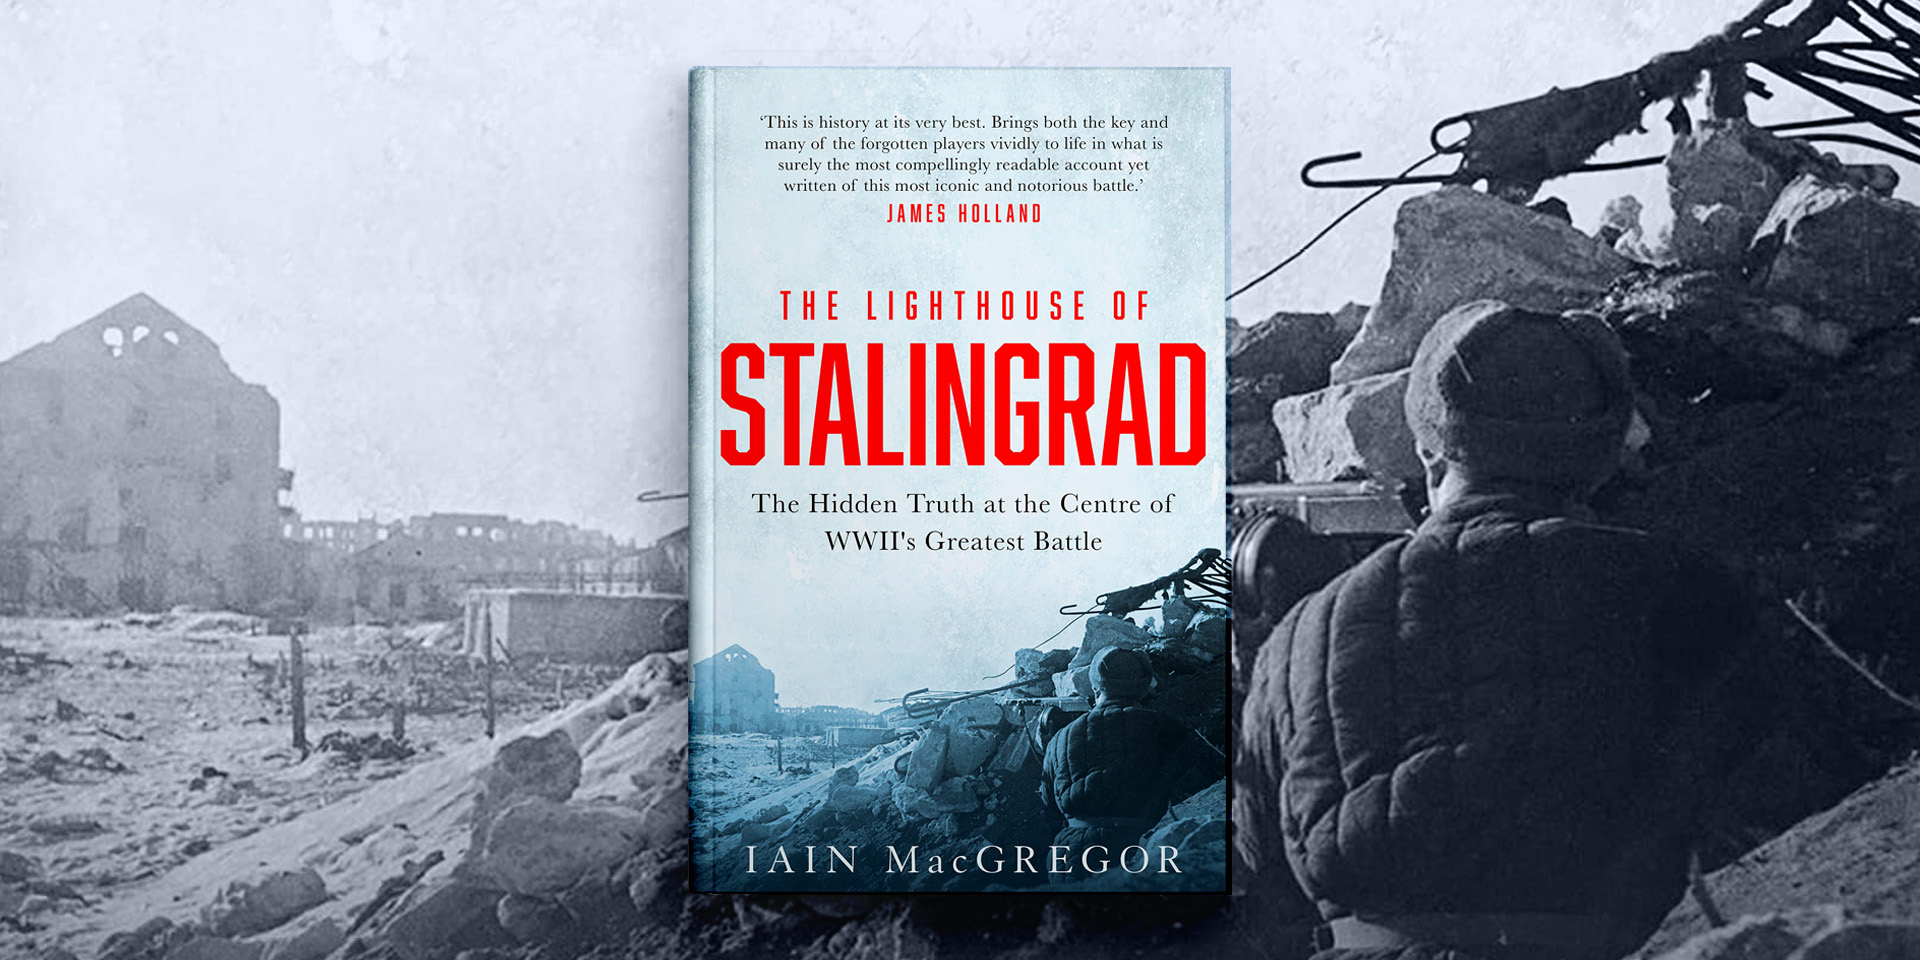 'The Lighthouse of Stalingrad' book cover